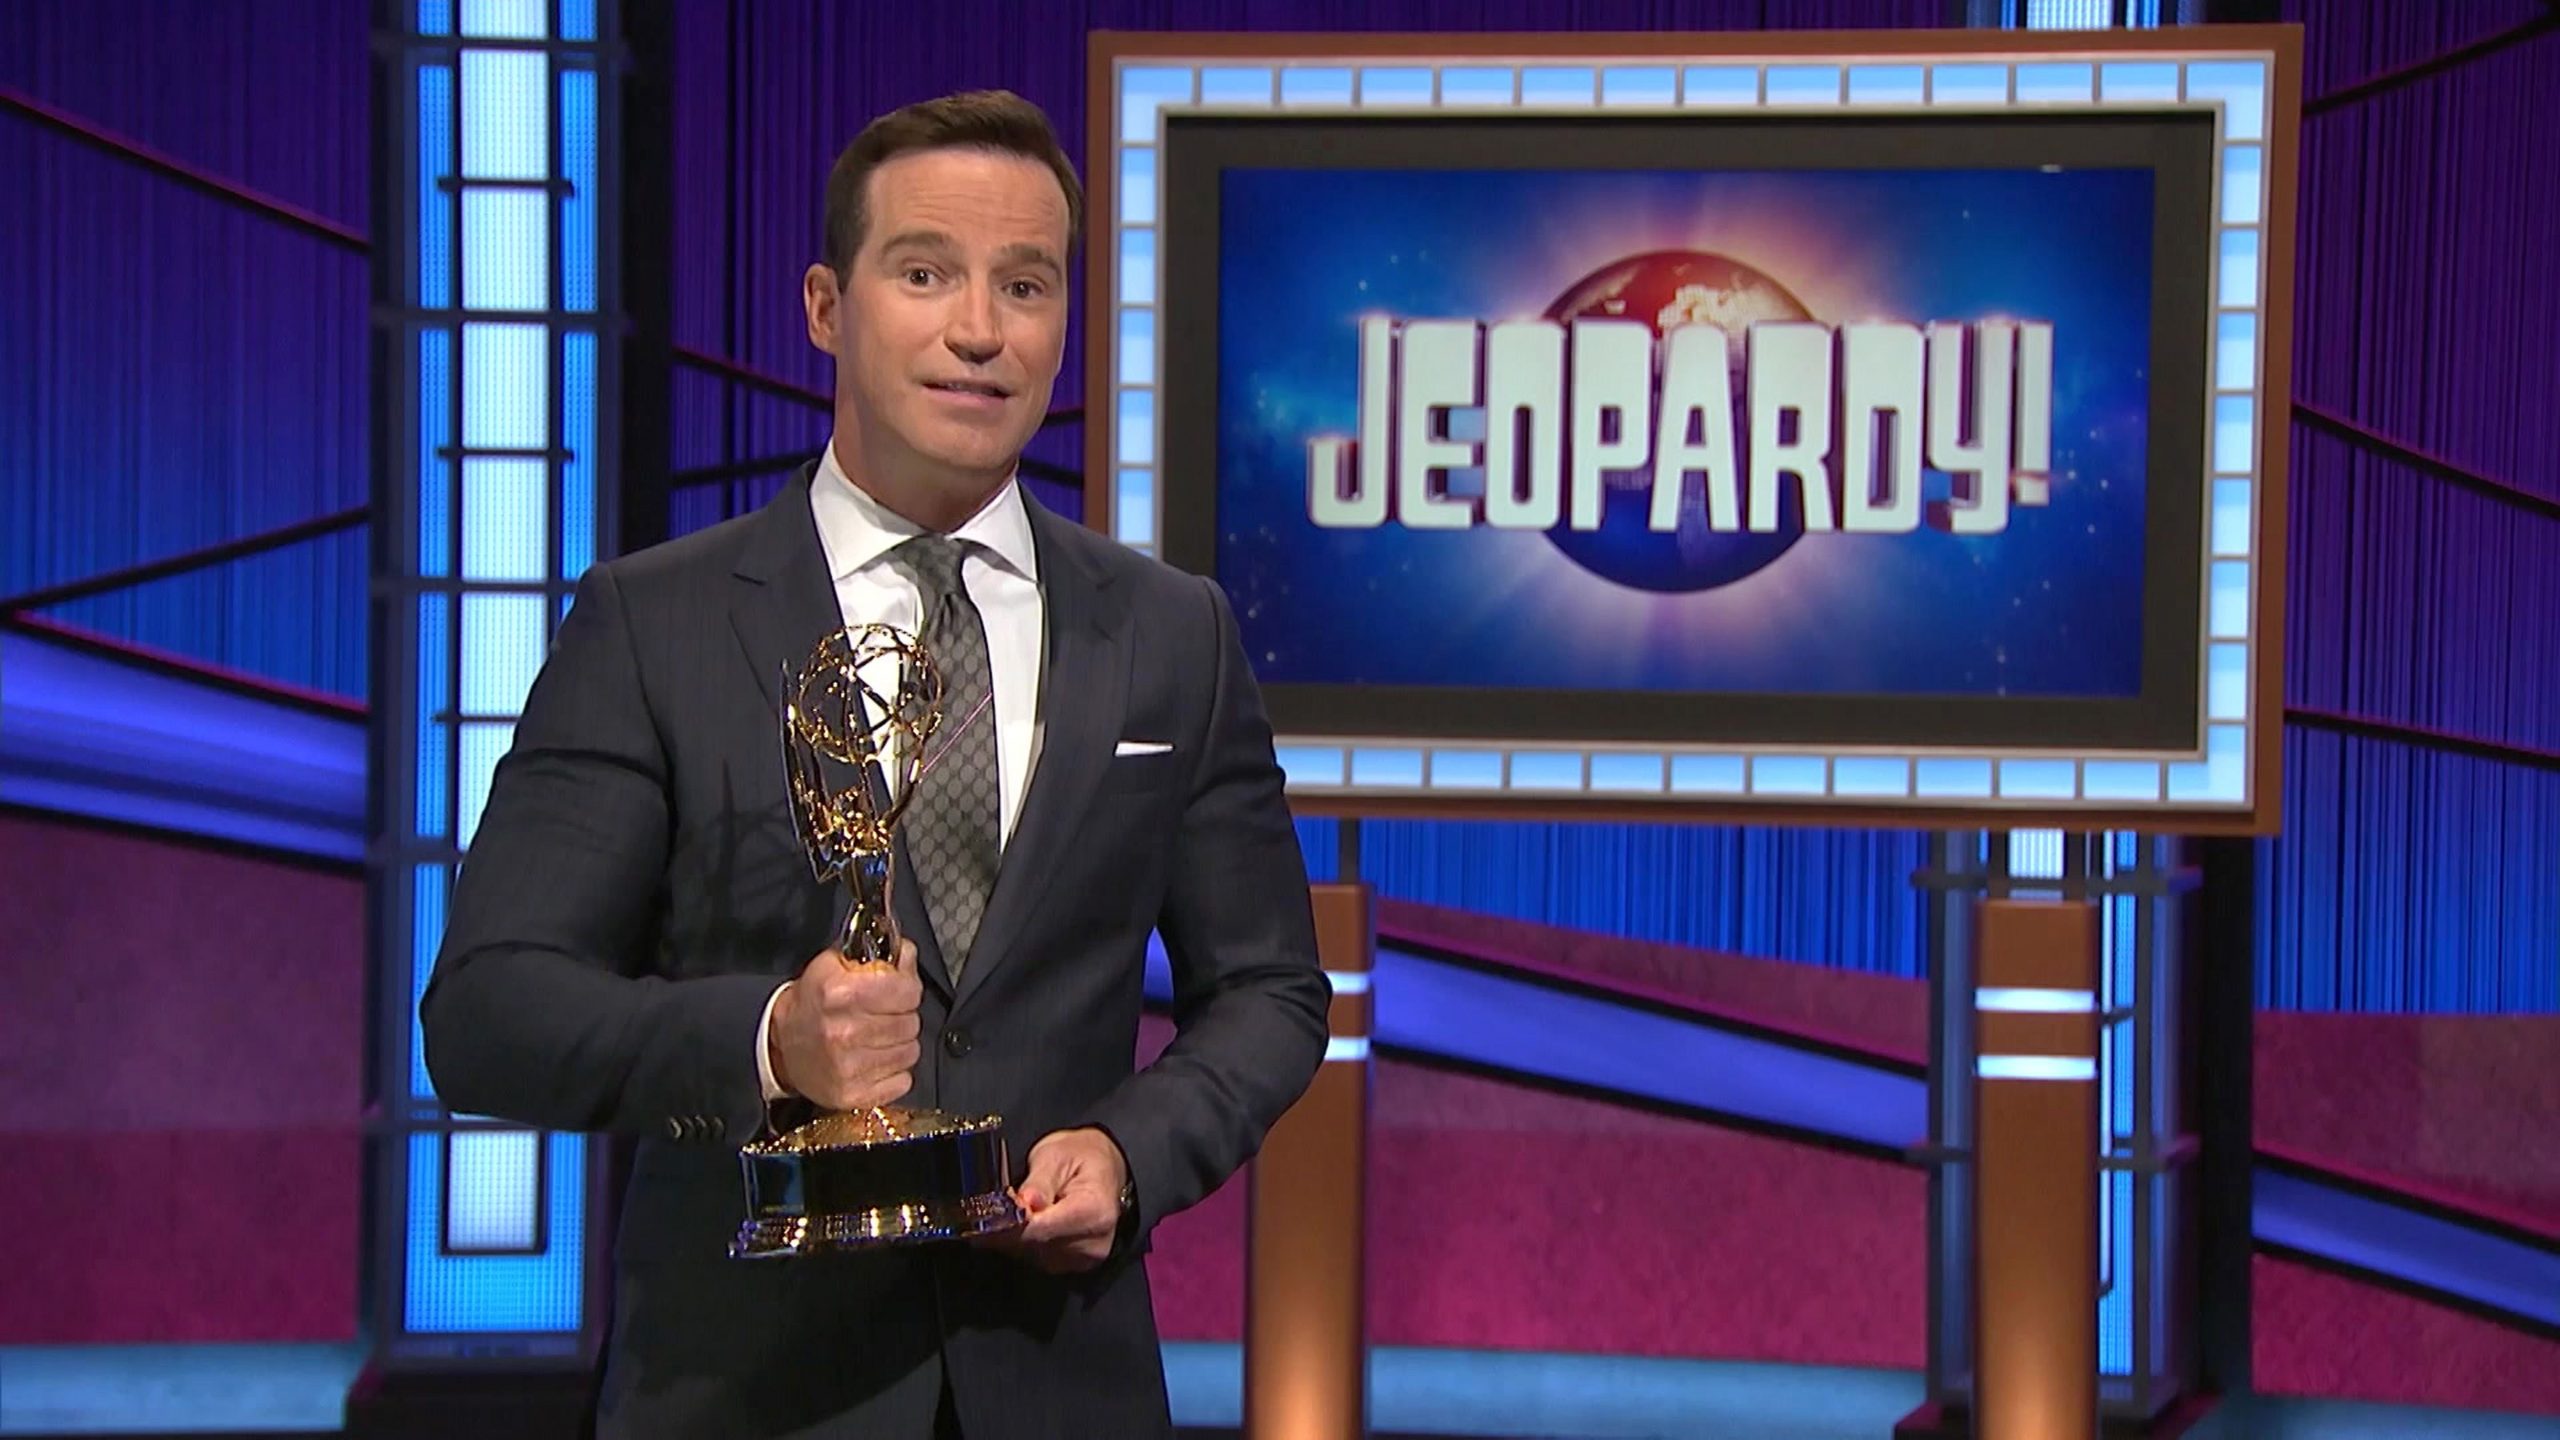 'Jeopardy!' new host and executive producer Mike Richards